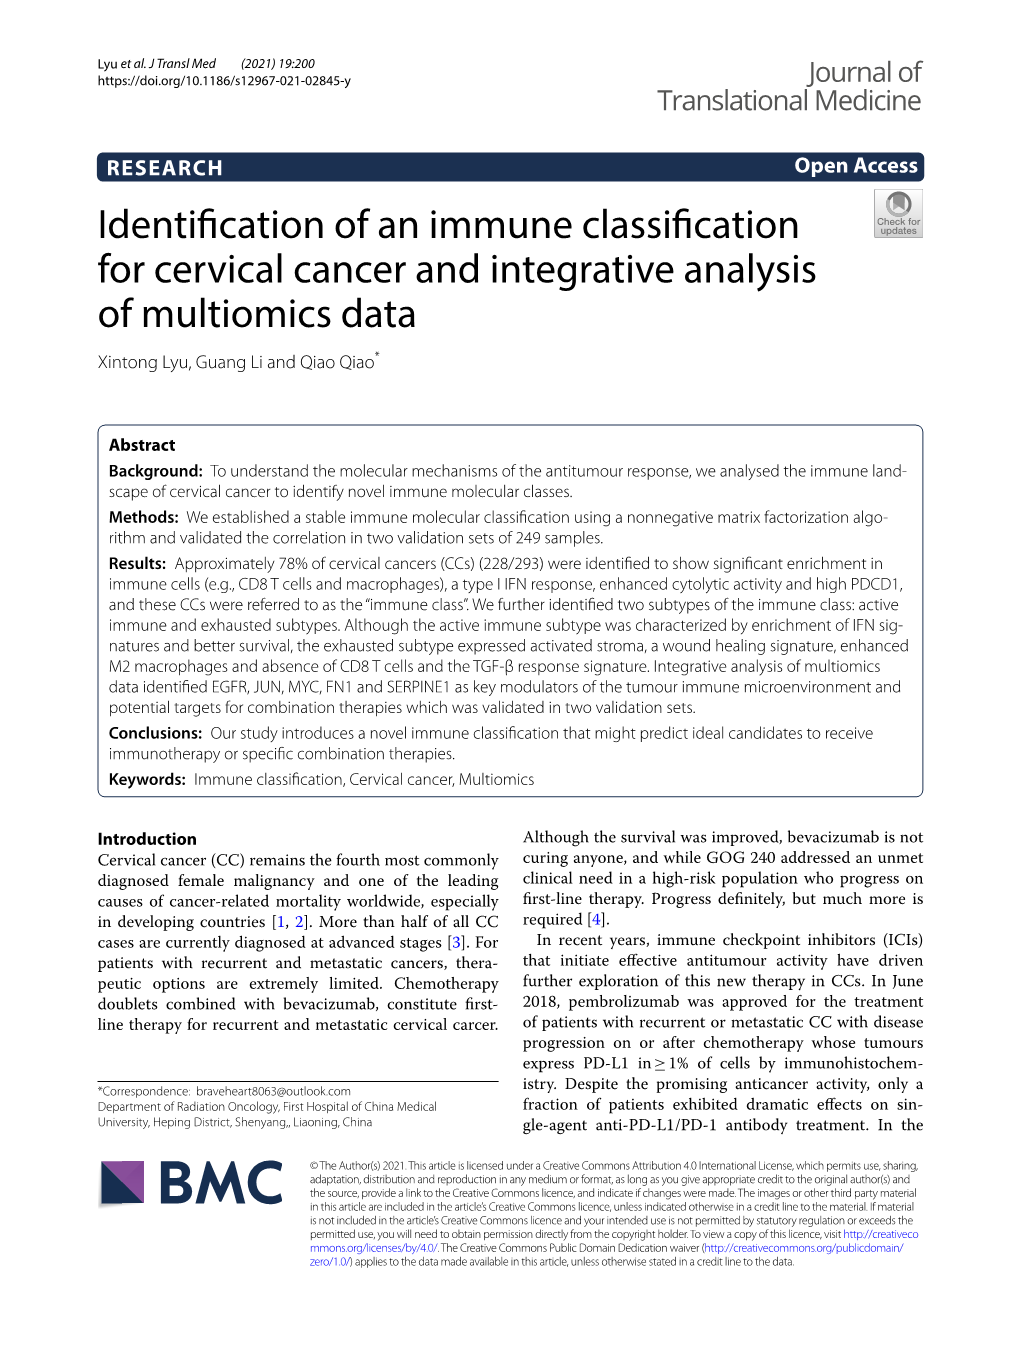 Identification of an Immune Classification for Cervical Cancer